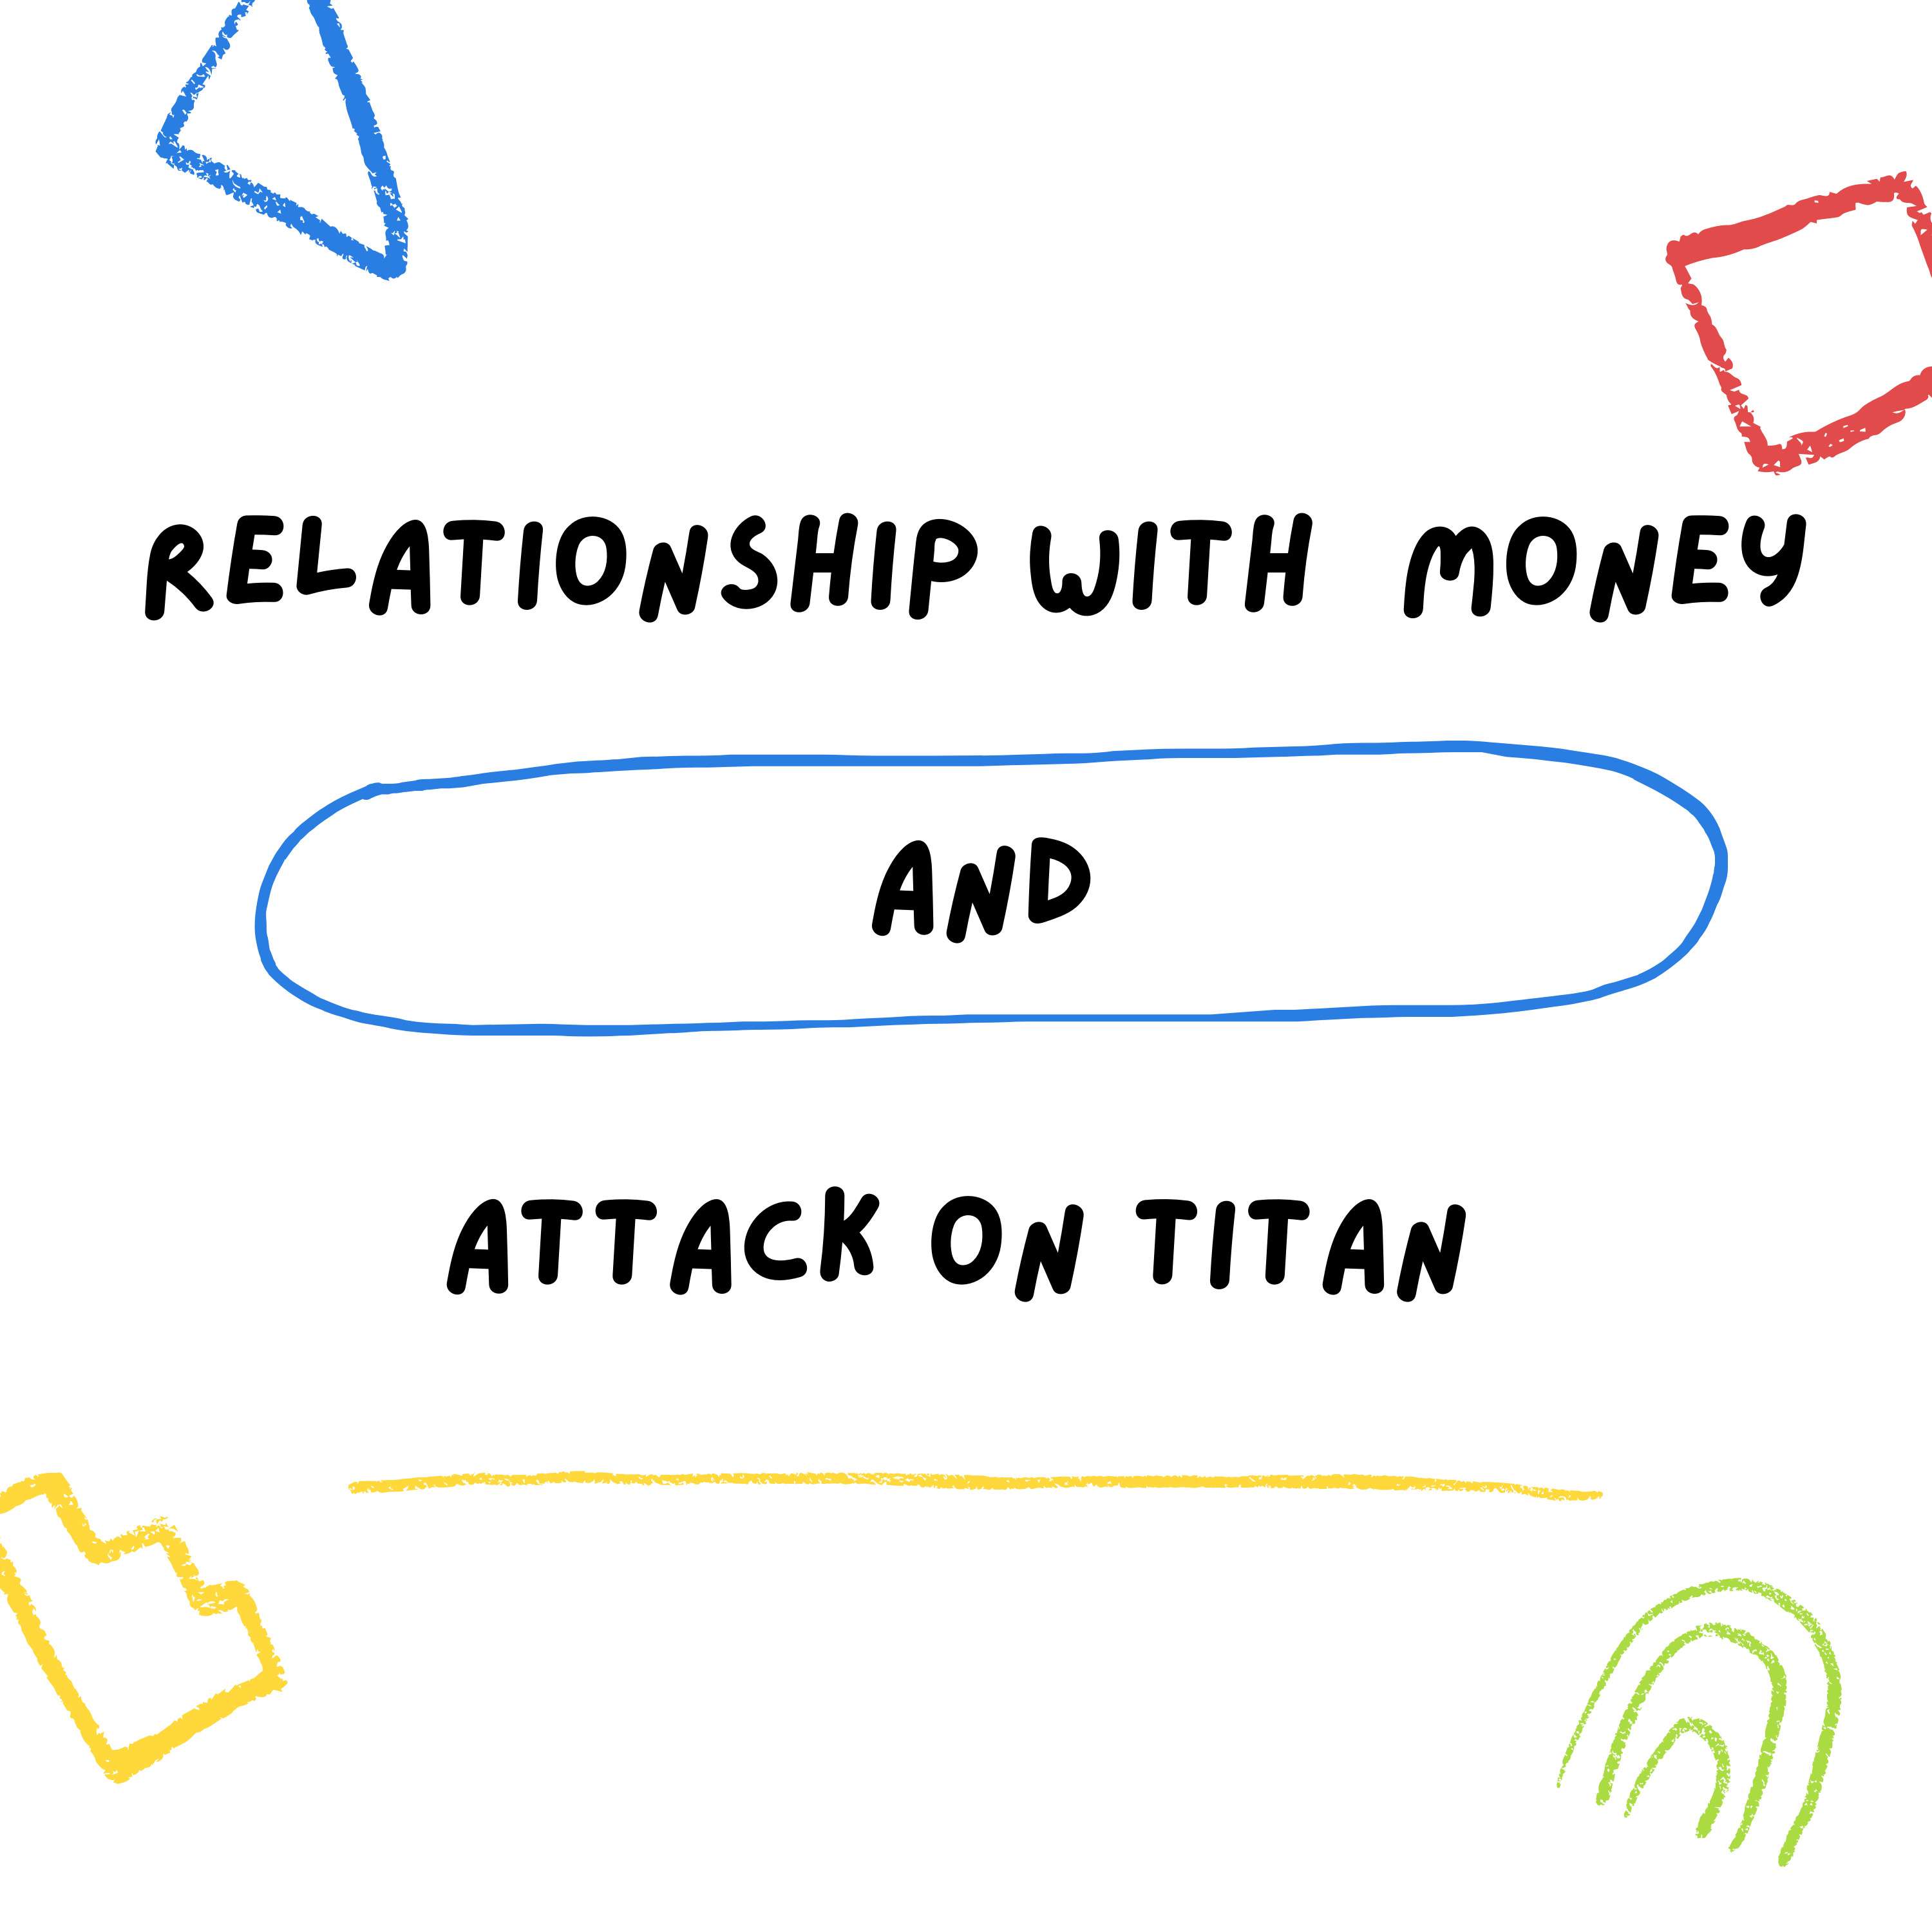 Relationship with Money and Attack on Titan